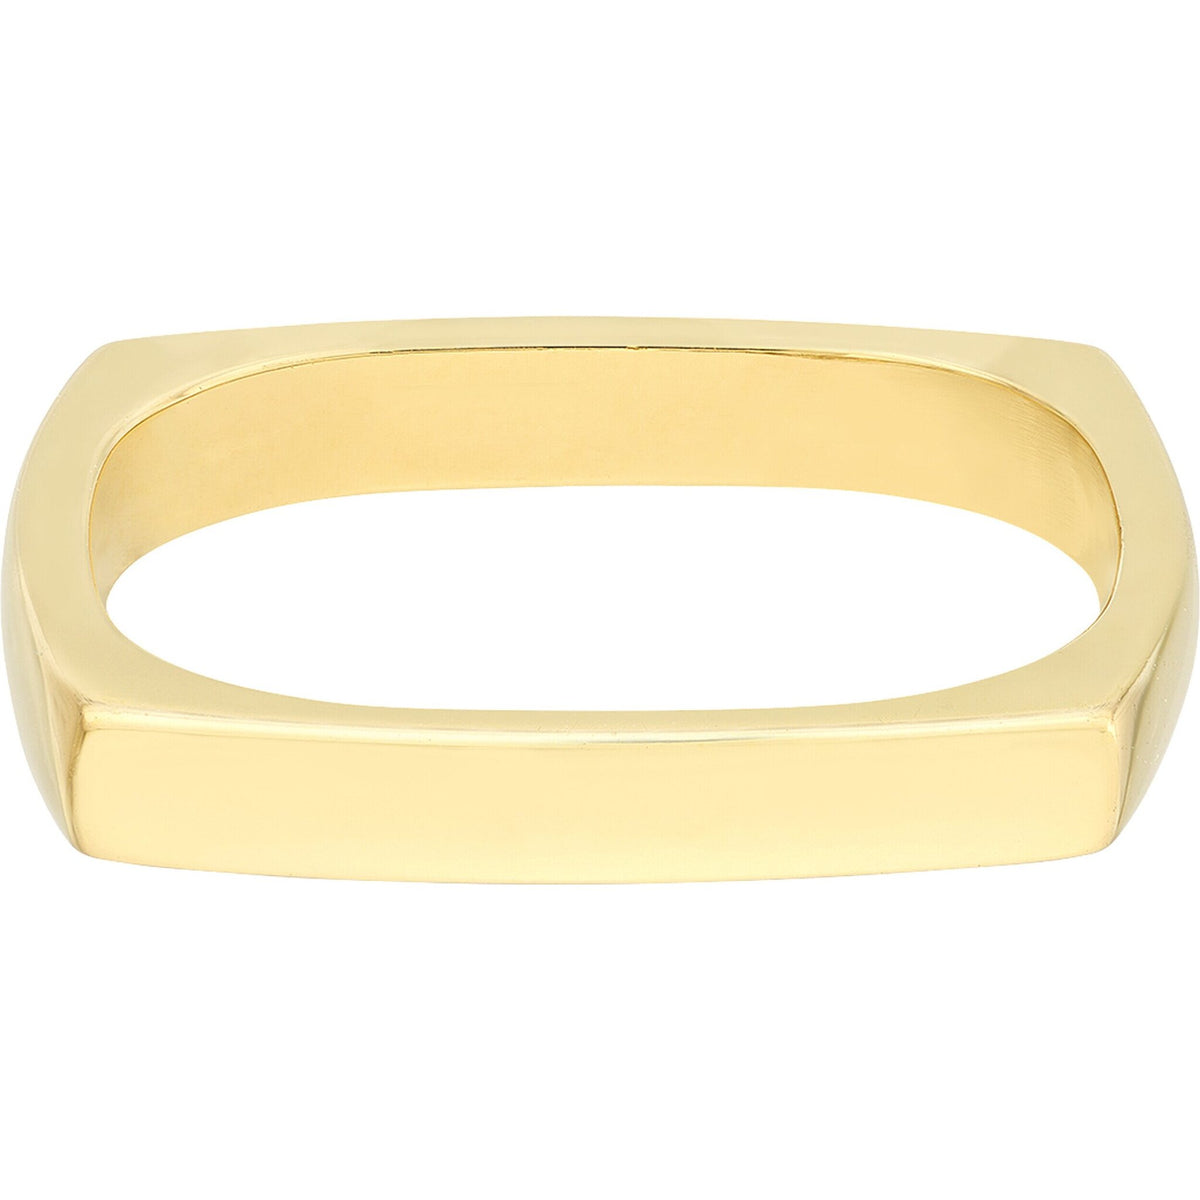 Olas d'Oro 6" Ring - 14K Yellow Gold Bold Gold Square Stack Ring